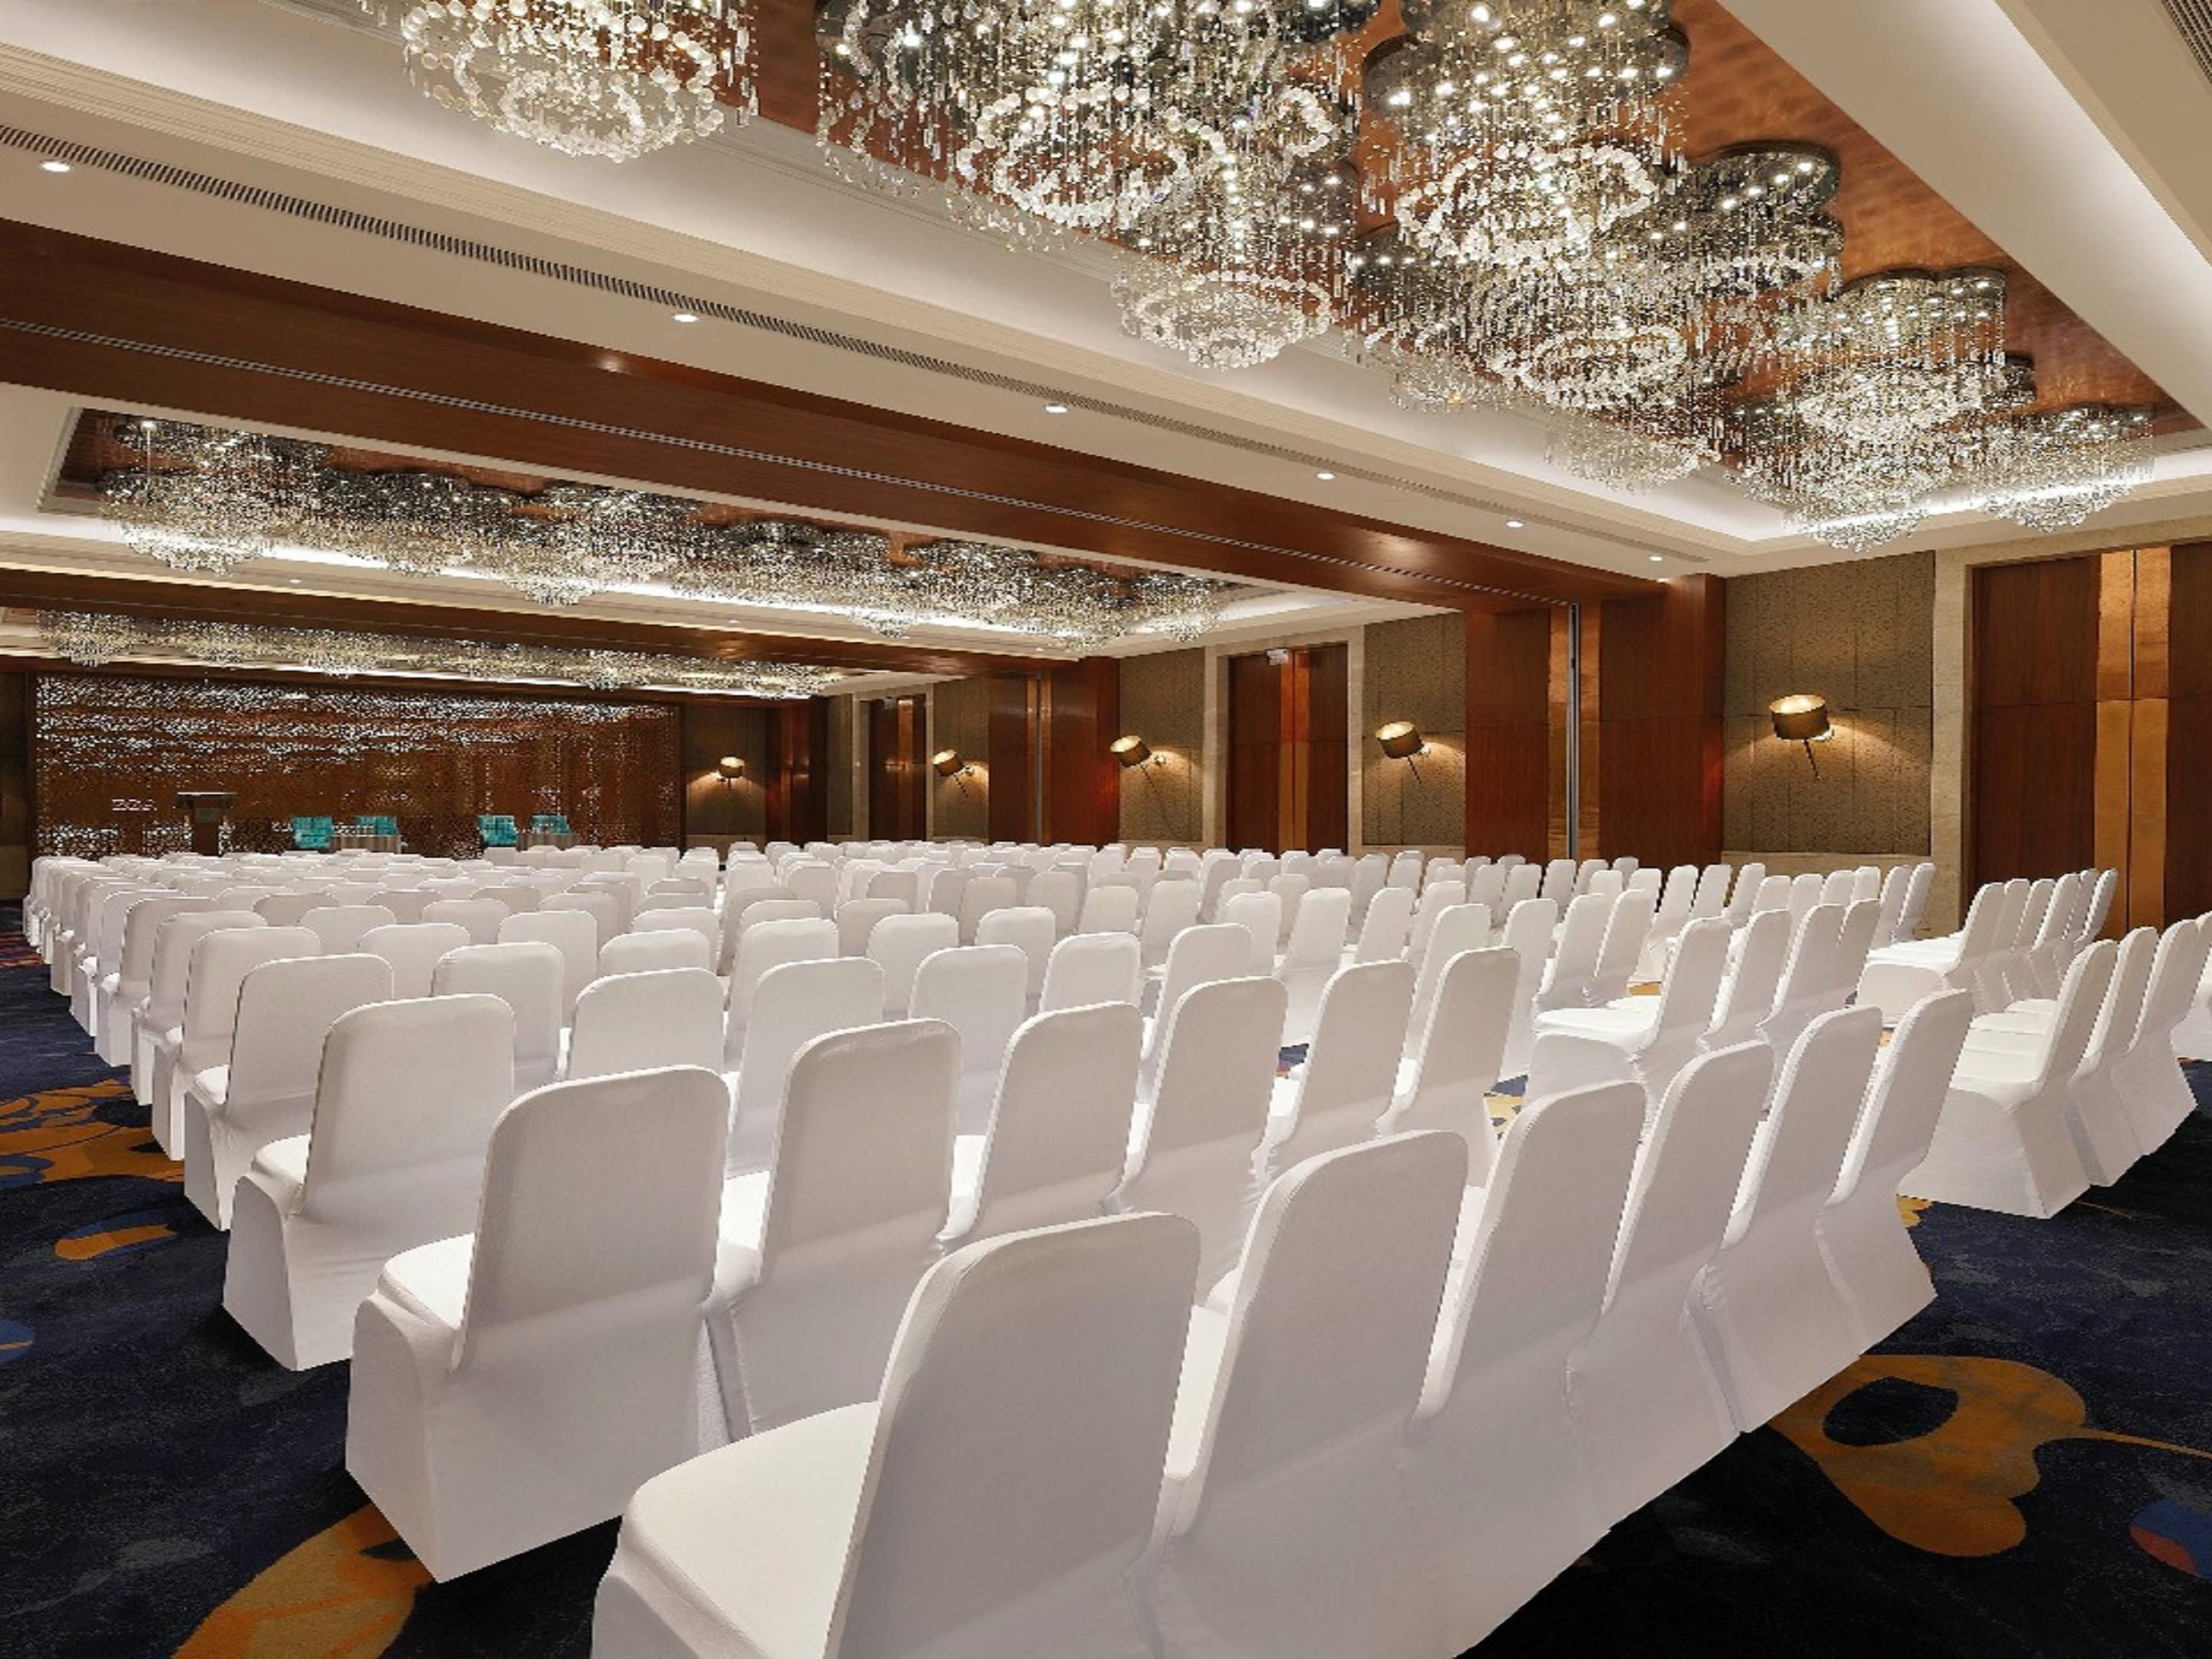 With 5000 square feet of flexible and stylish meeting space, state-of-the-art technology, uninterrupted internet connectivity, and well-appointed break-out rooms ideal for flexible meeting options, conferences, events, and celebrations.